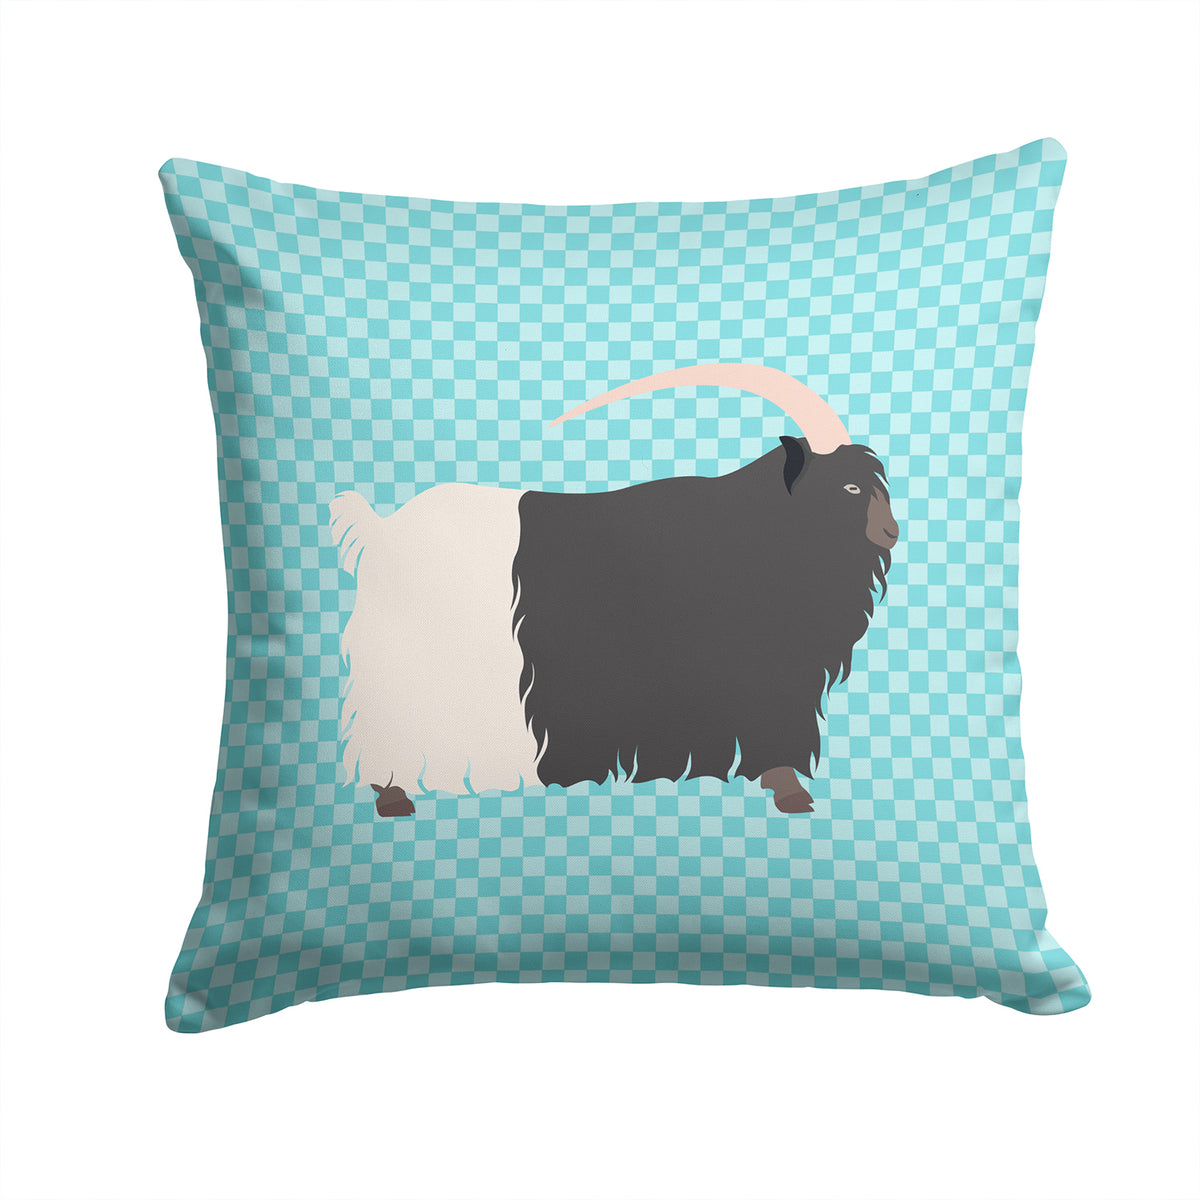 Welsh Black-Necked Goat Blue Check Fabric Decorative Pillow BB8061PW1414 - the-store.com